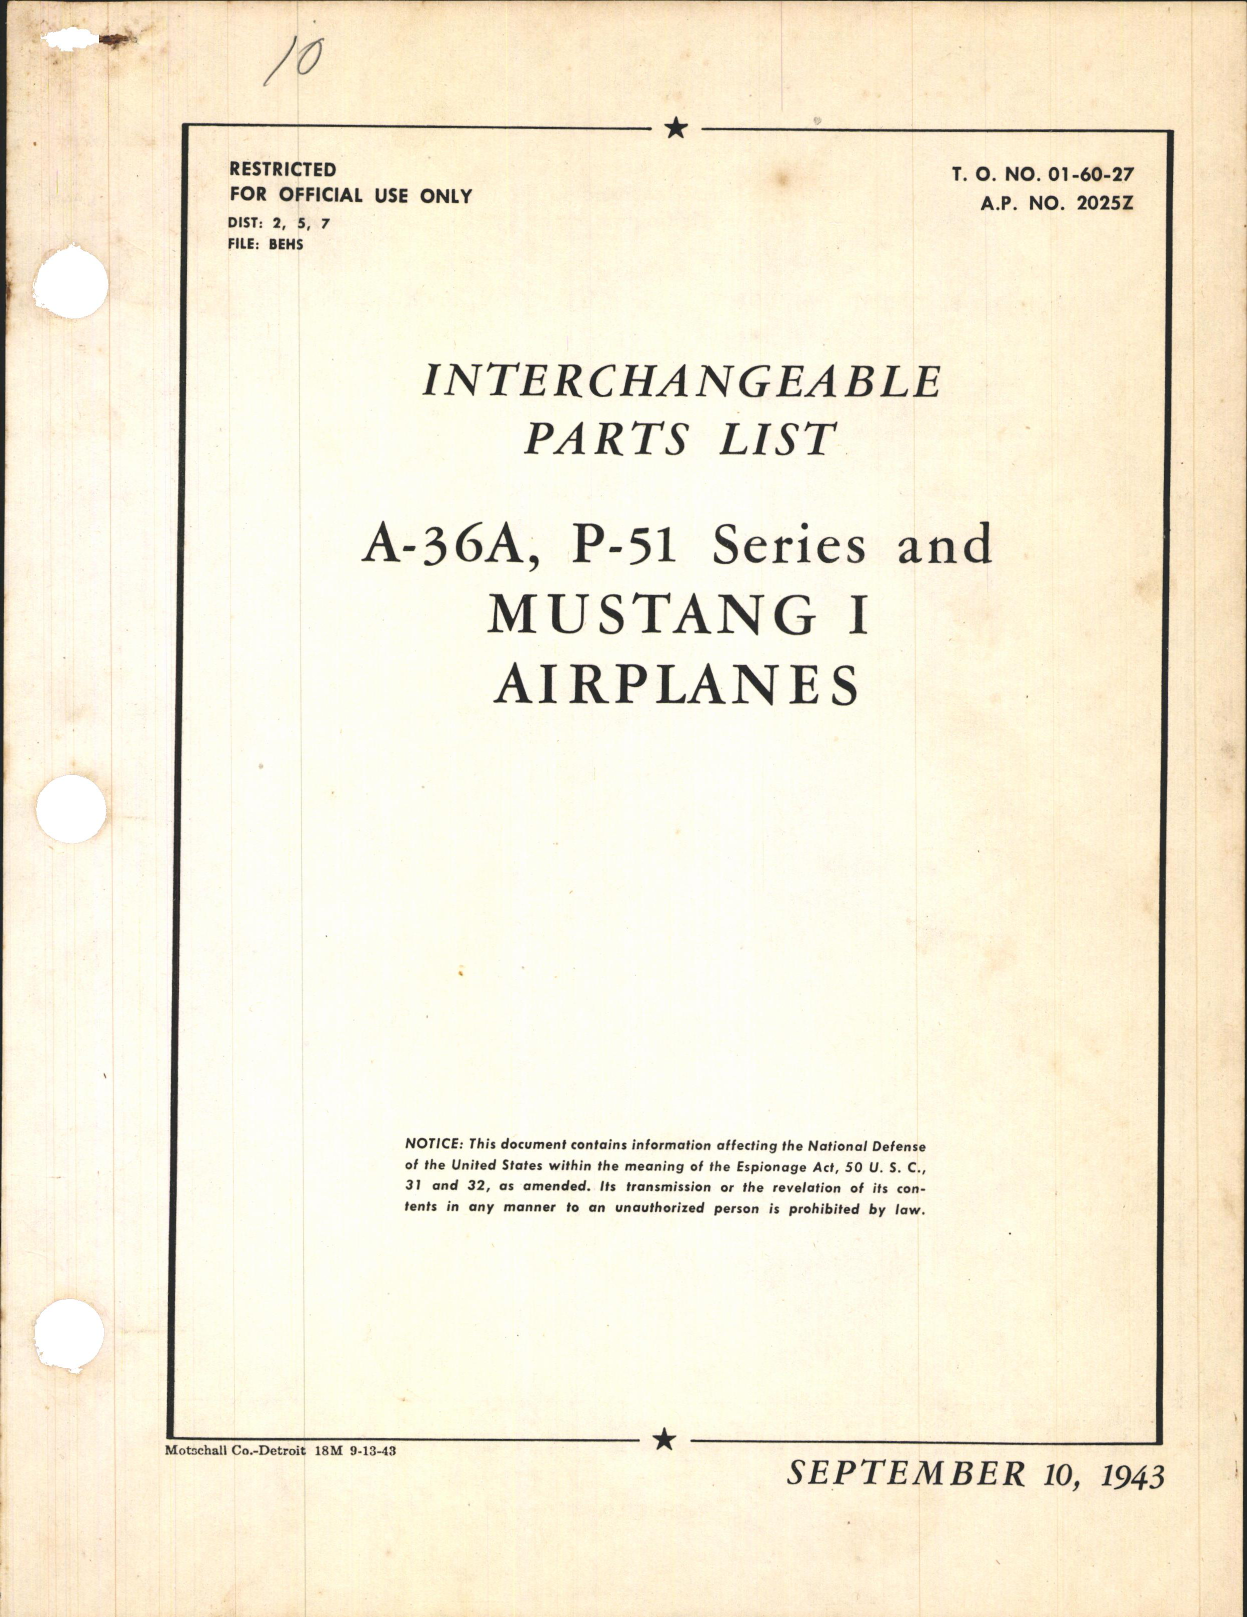 Sample page 1 from AirCorps Library document: Interchangeable Parts List for A-36A, P-51 Series, and Mustang I Airplanes